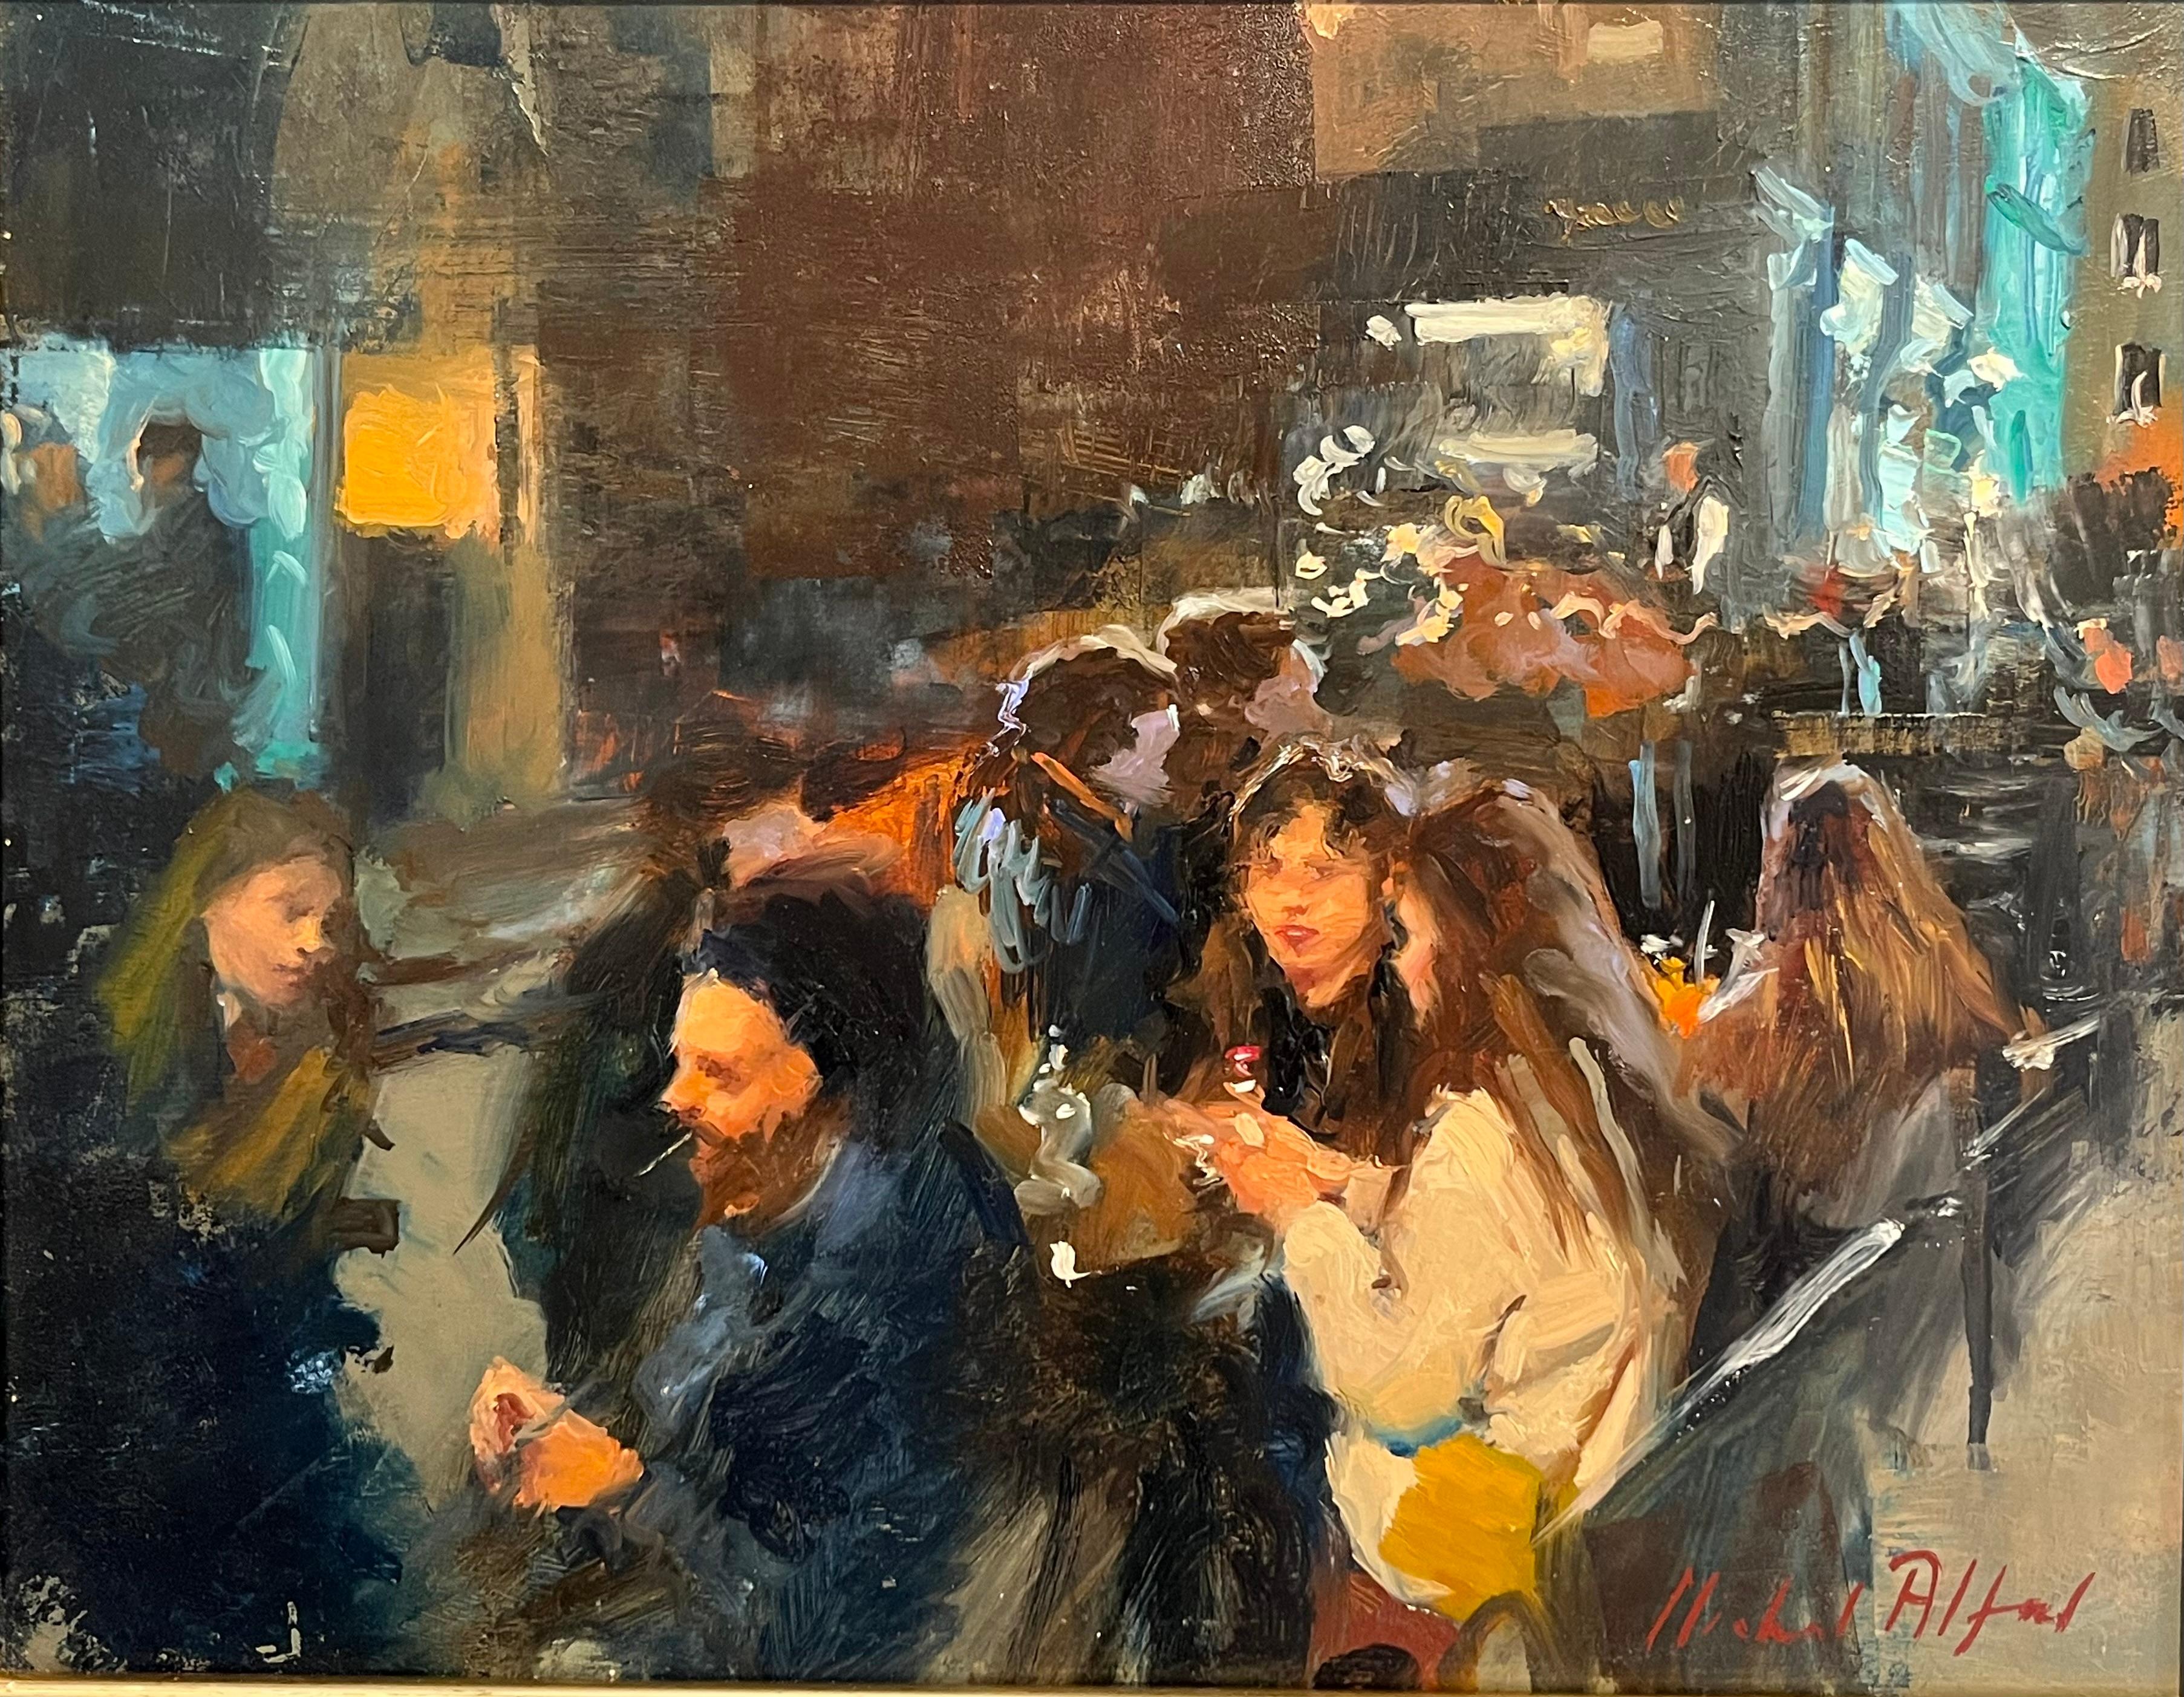 Michael Alford Portrait Painting - Outside Dining, West End-original impressionism figurative cityscape painting 